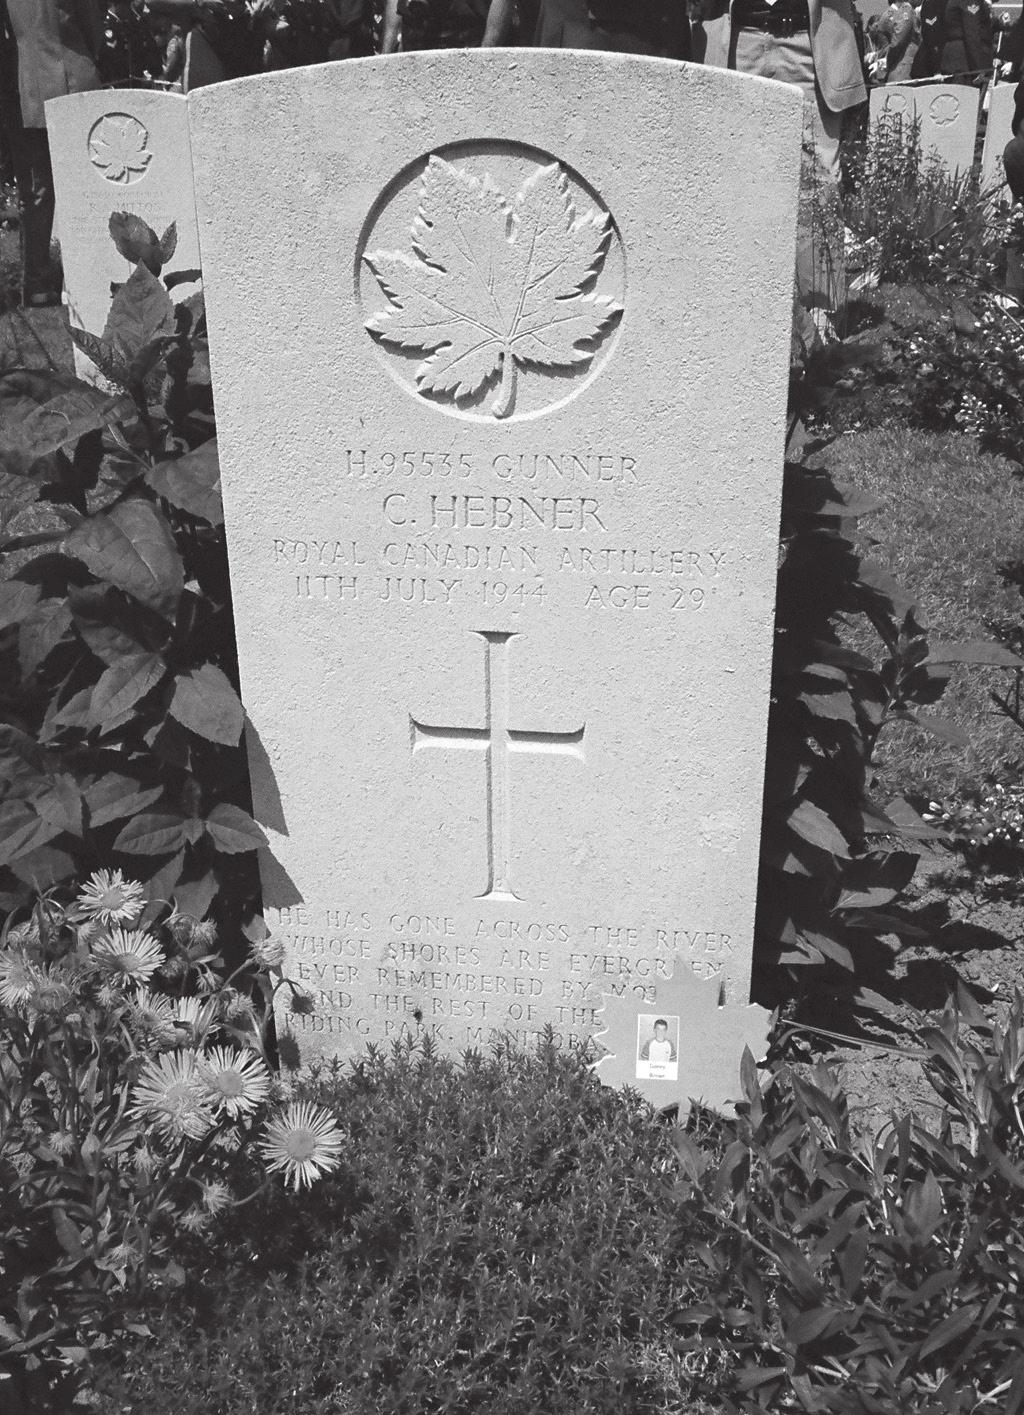 Juno Beach was known as the Canadian beach as it was assigned to the 3rd Canadian Infantry Division (with the 2nd Canadian Armoured Brigade). right of the headstone.